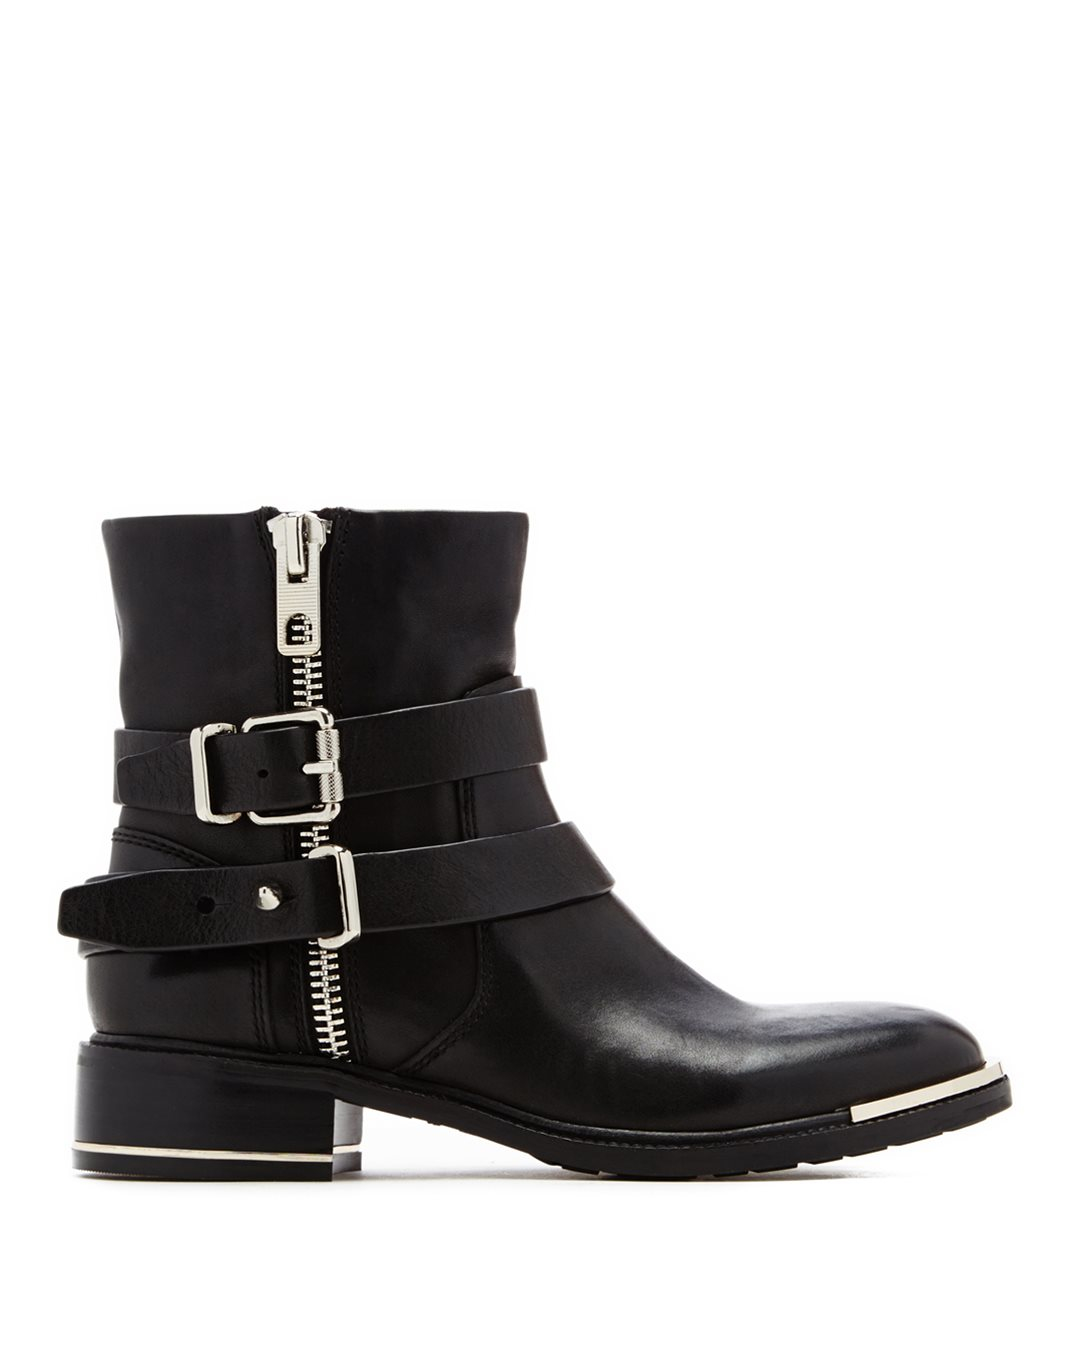 Dolce vita Zachary Boots in Black | Lyst